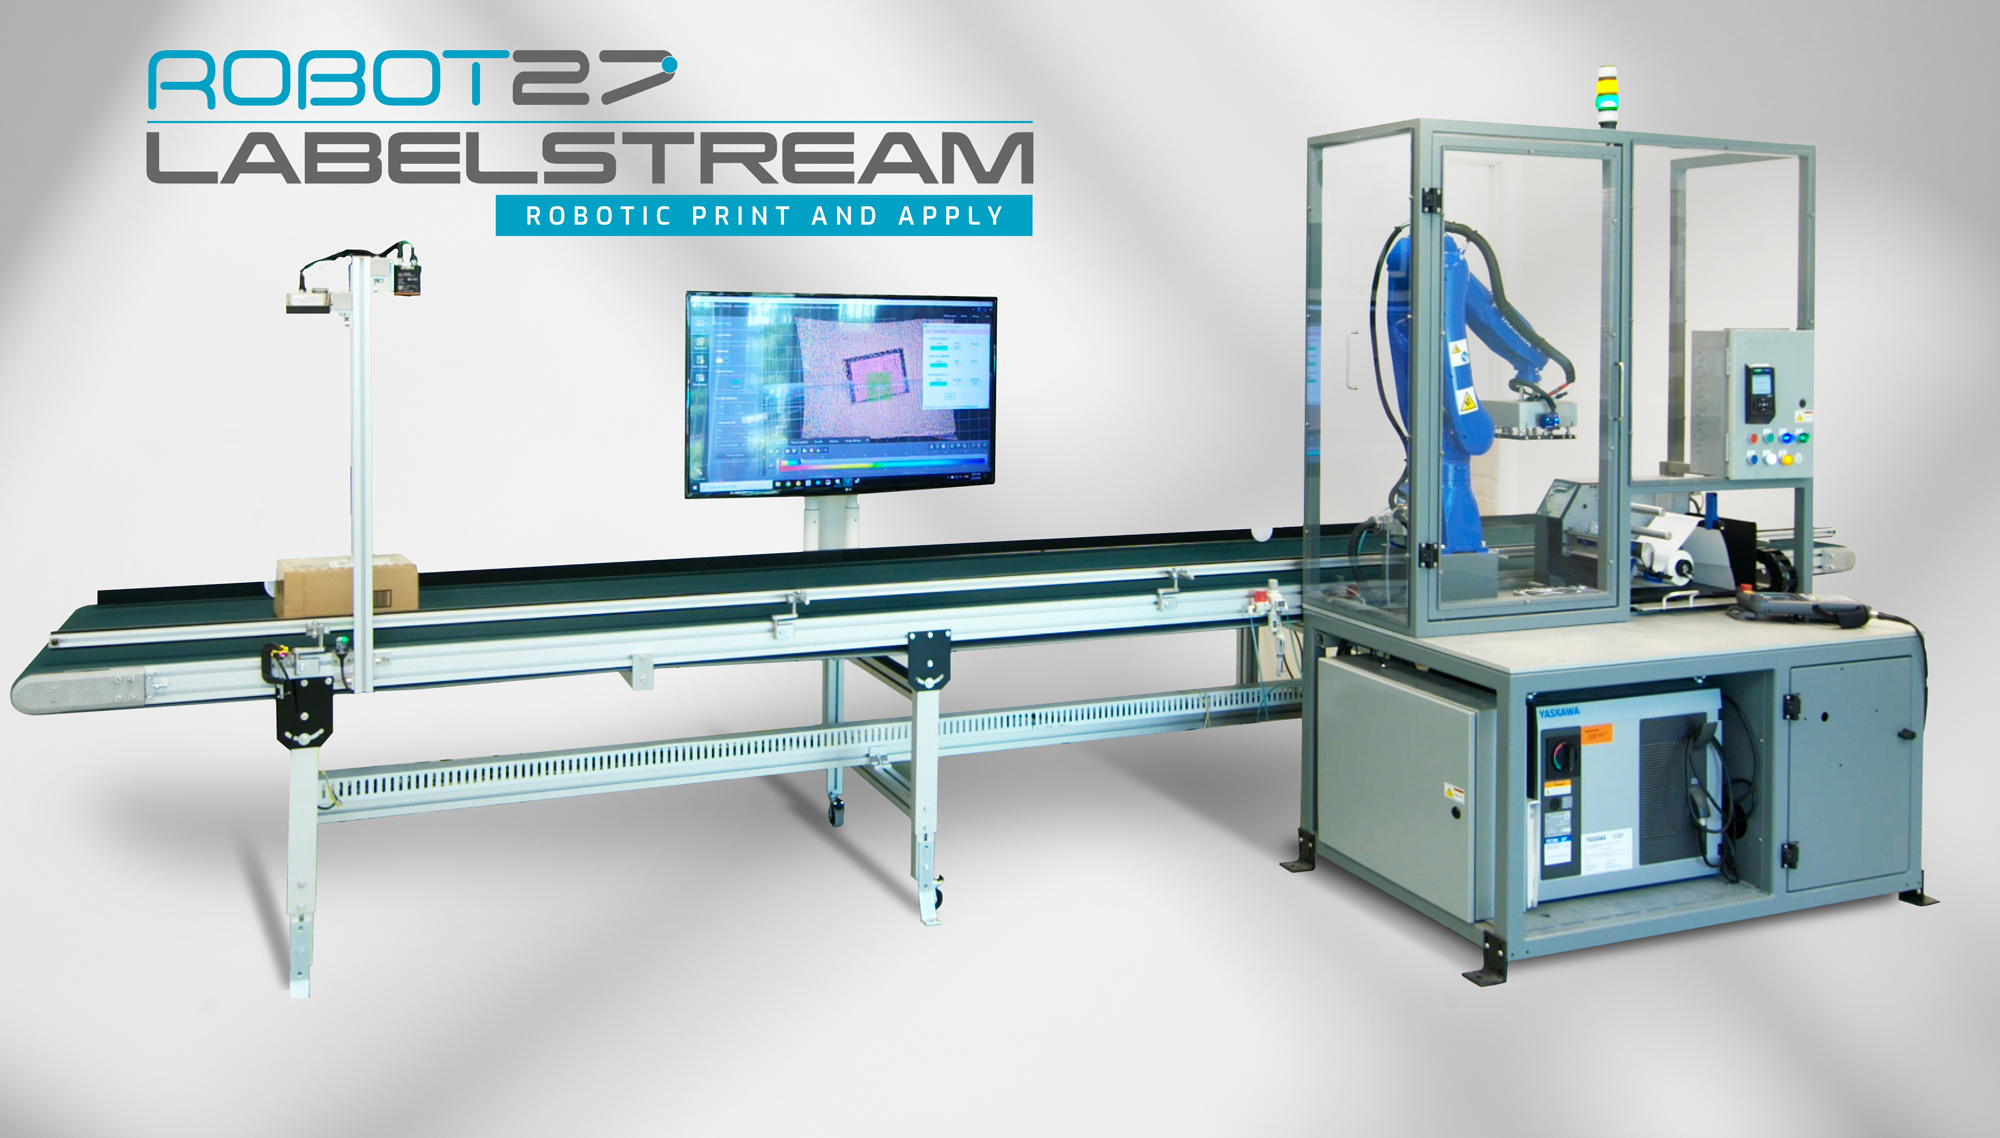 Labelstream robotic print and apply